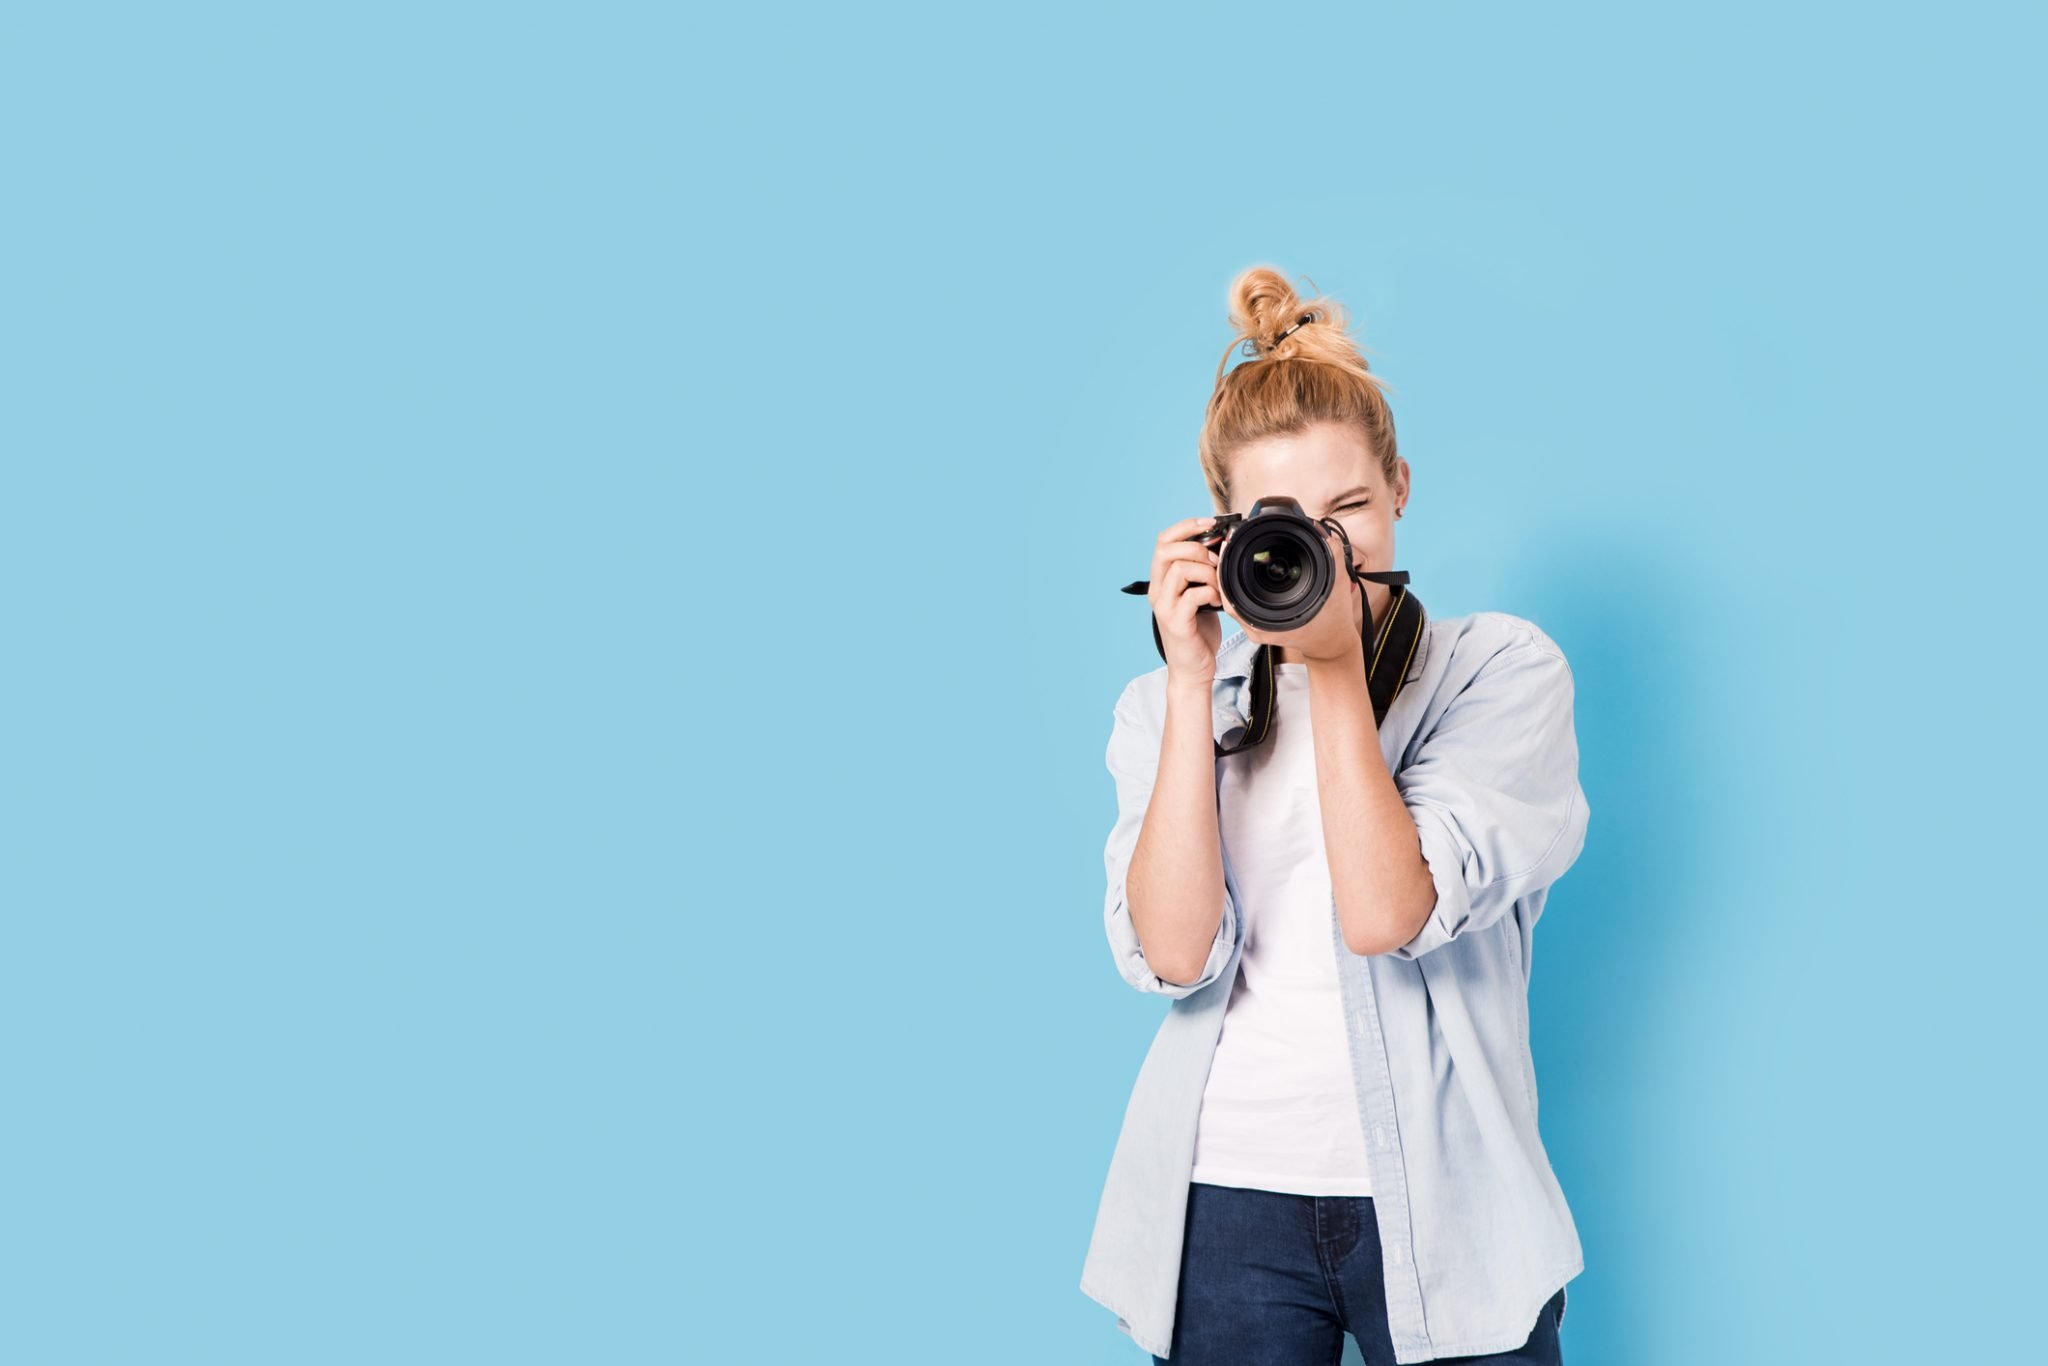 How to Take a Great LinkedIn Profile Pic, tips featured by resume writers, Red Rocket Resume